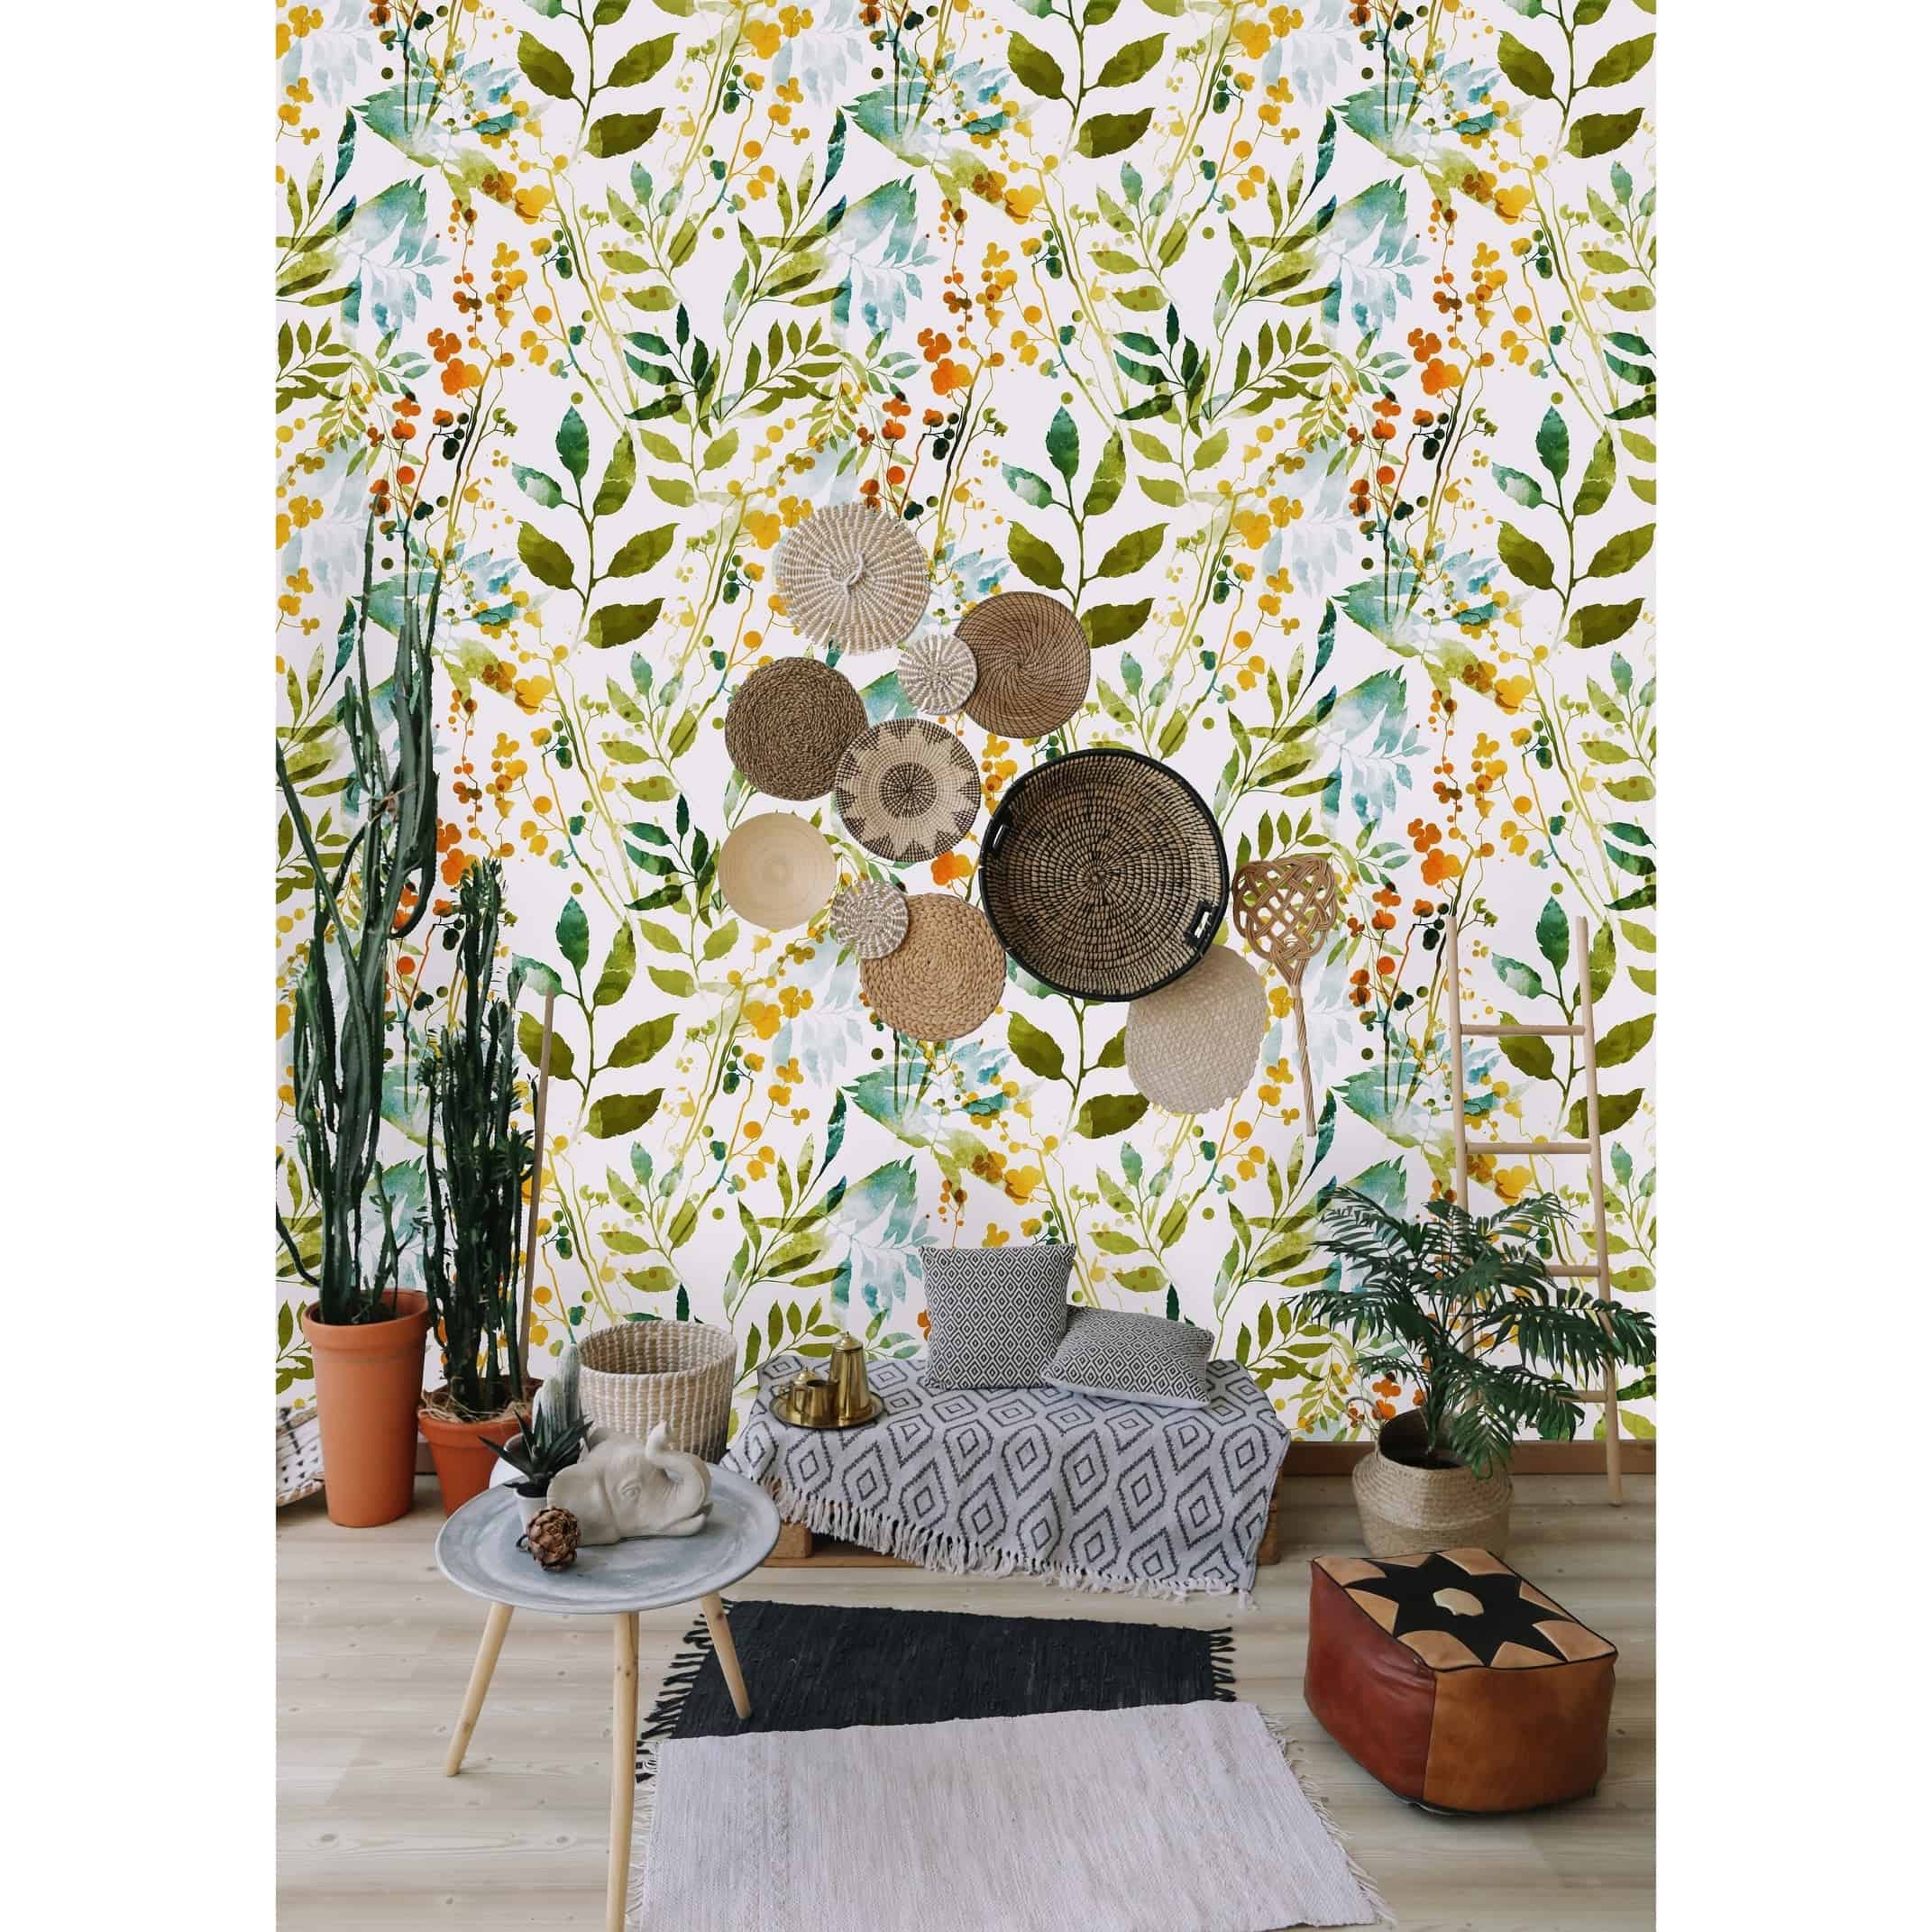 Make Your Walls Come To Life With Wallpaper